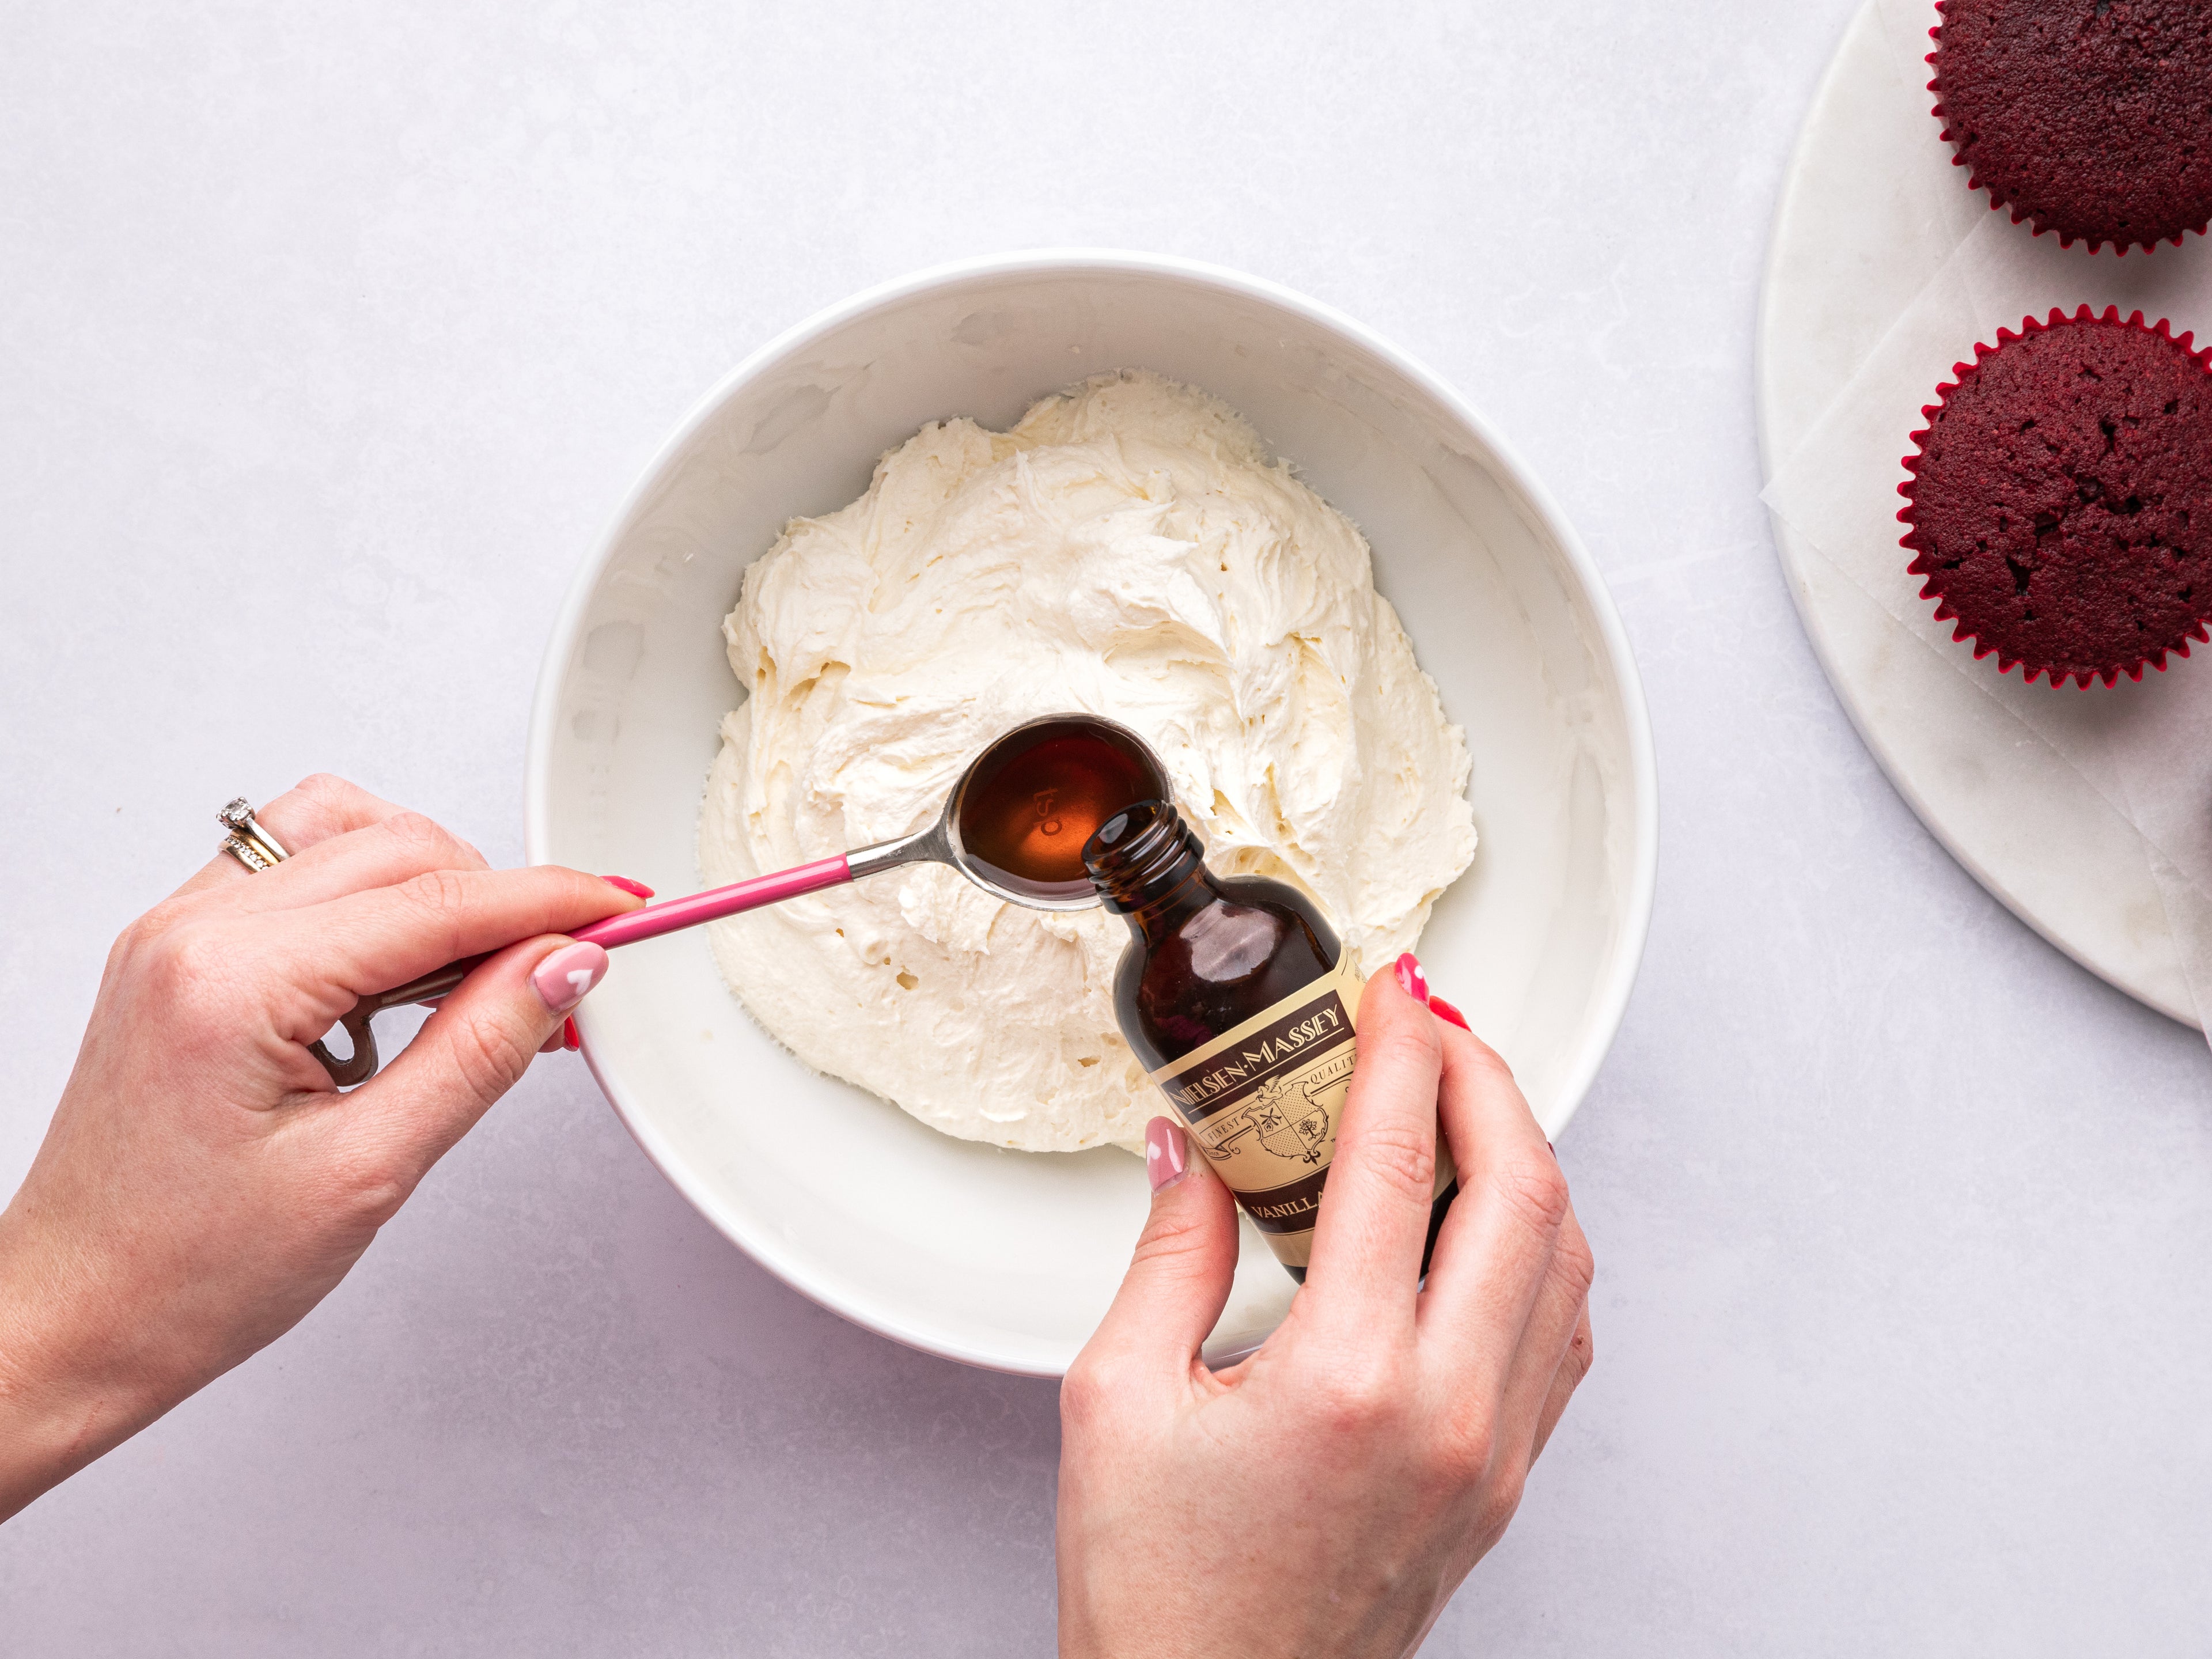 Hands measuring out a teaspoon of vanilla extract into a bowl of buttercream